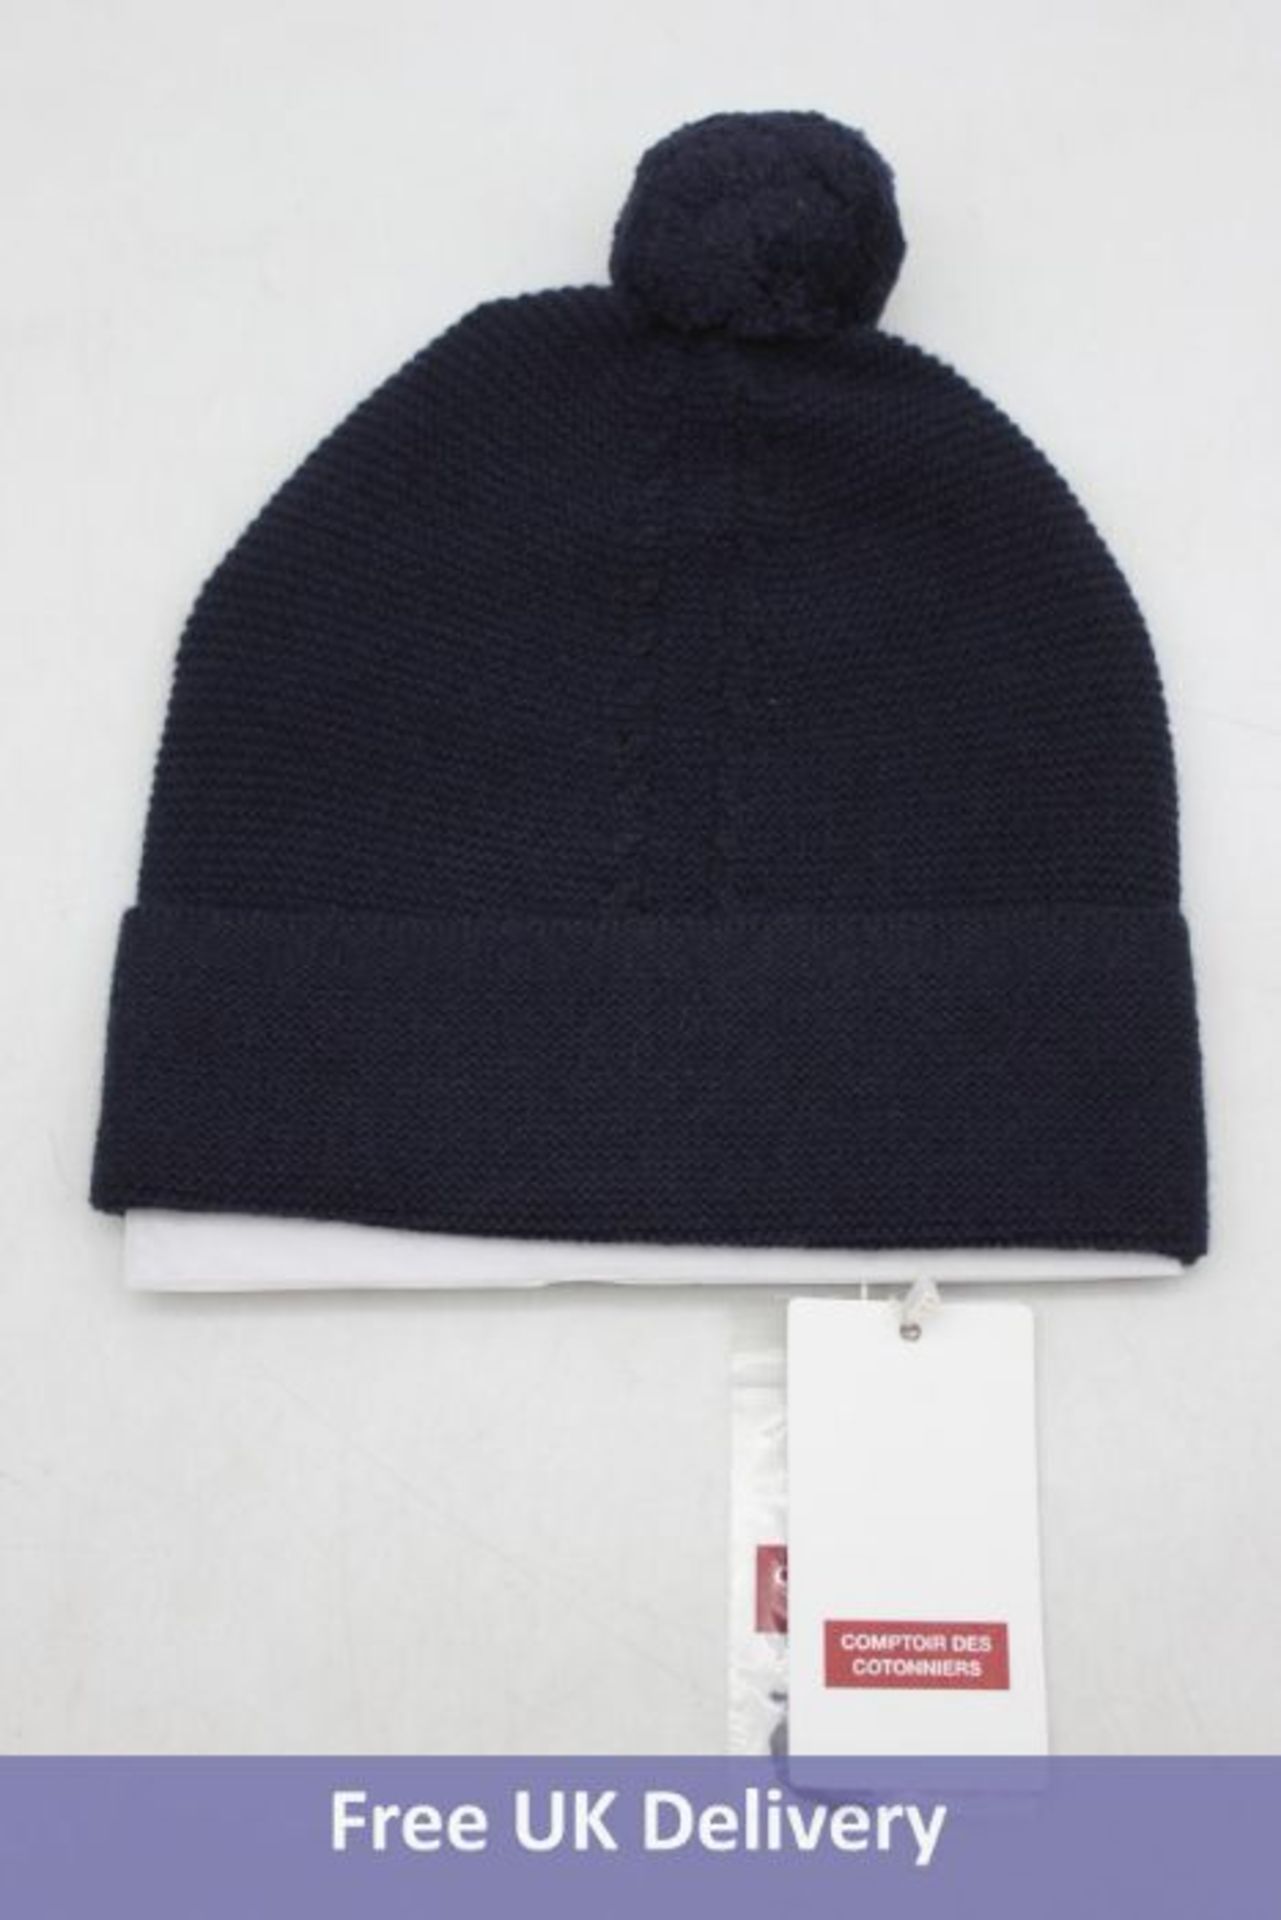 Mimizan Cashmere Beanie Night Sky, Brand New In Bag With Tags